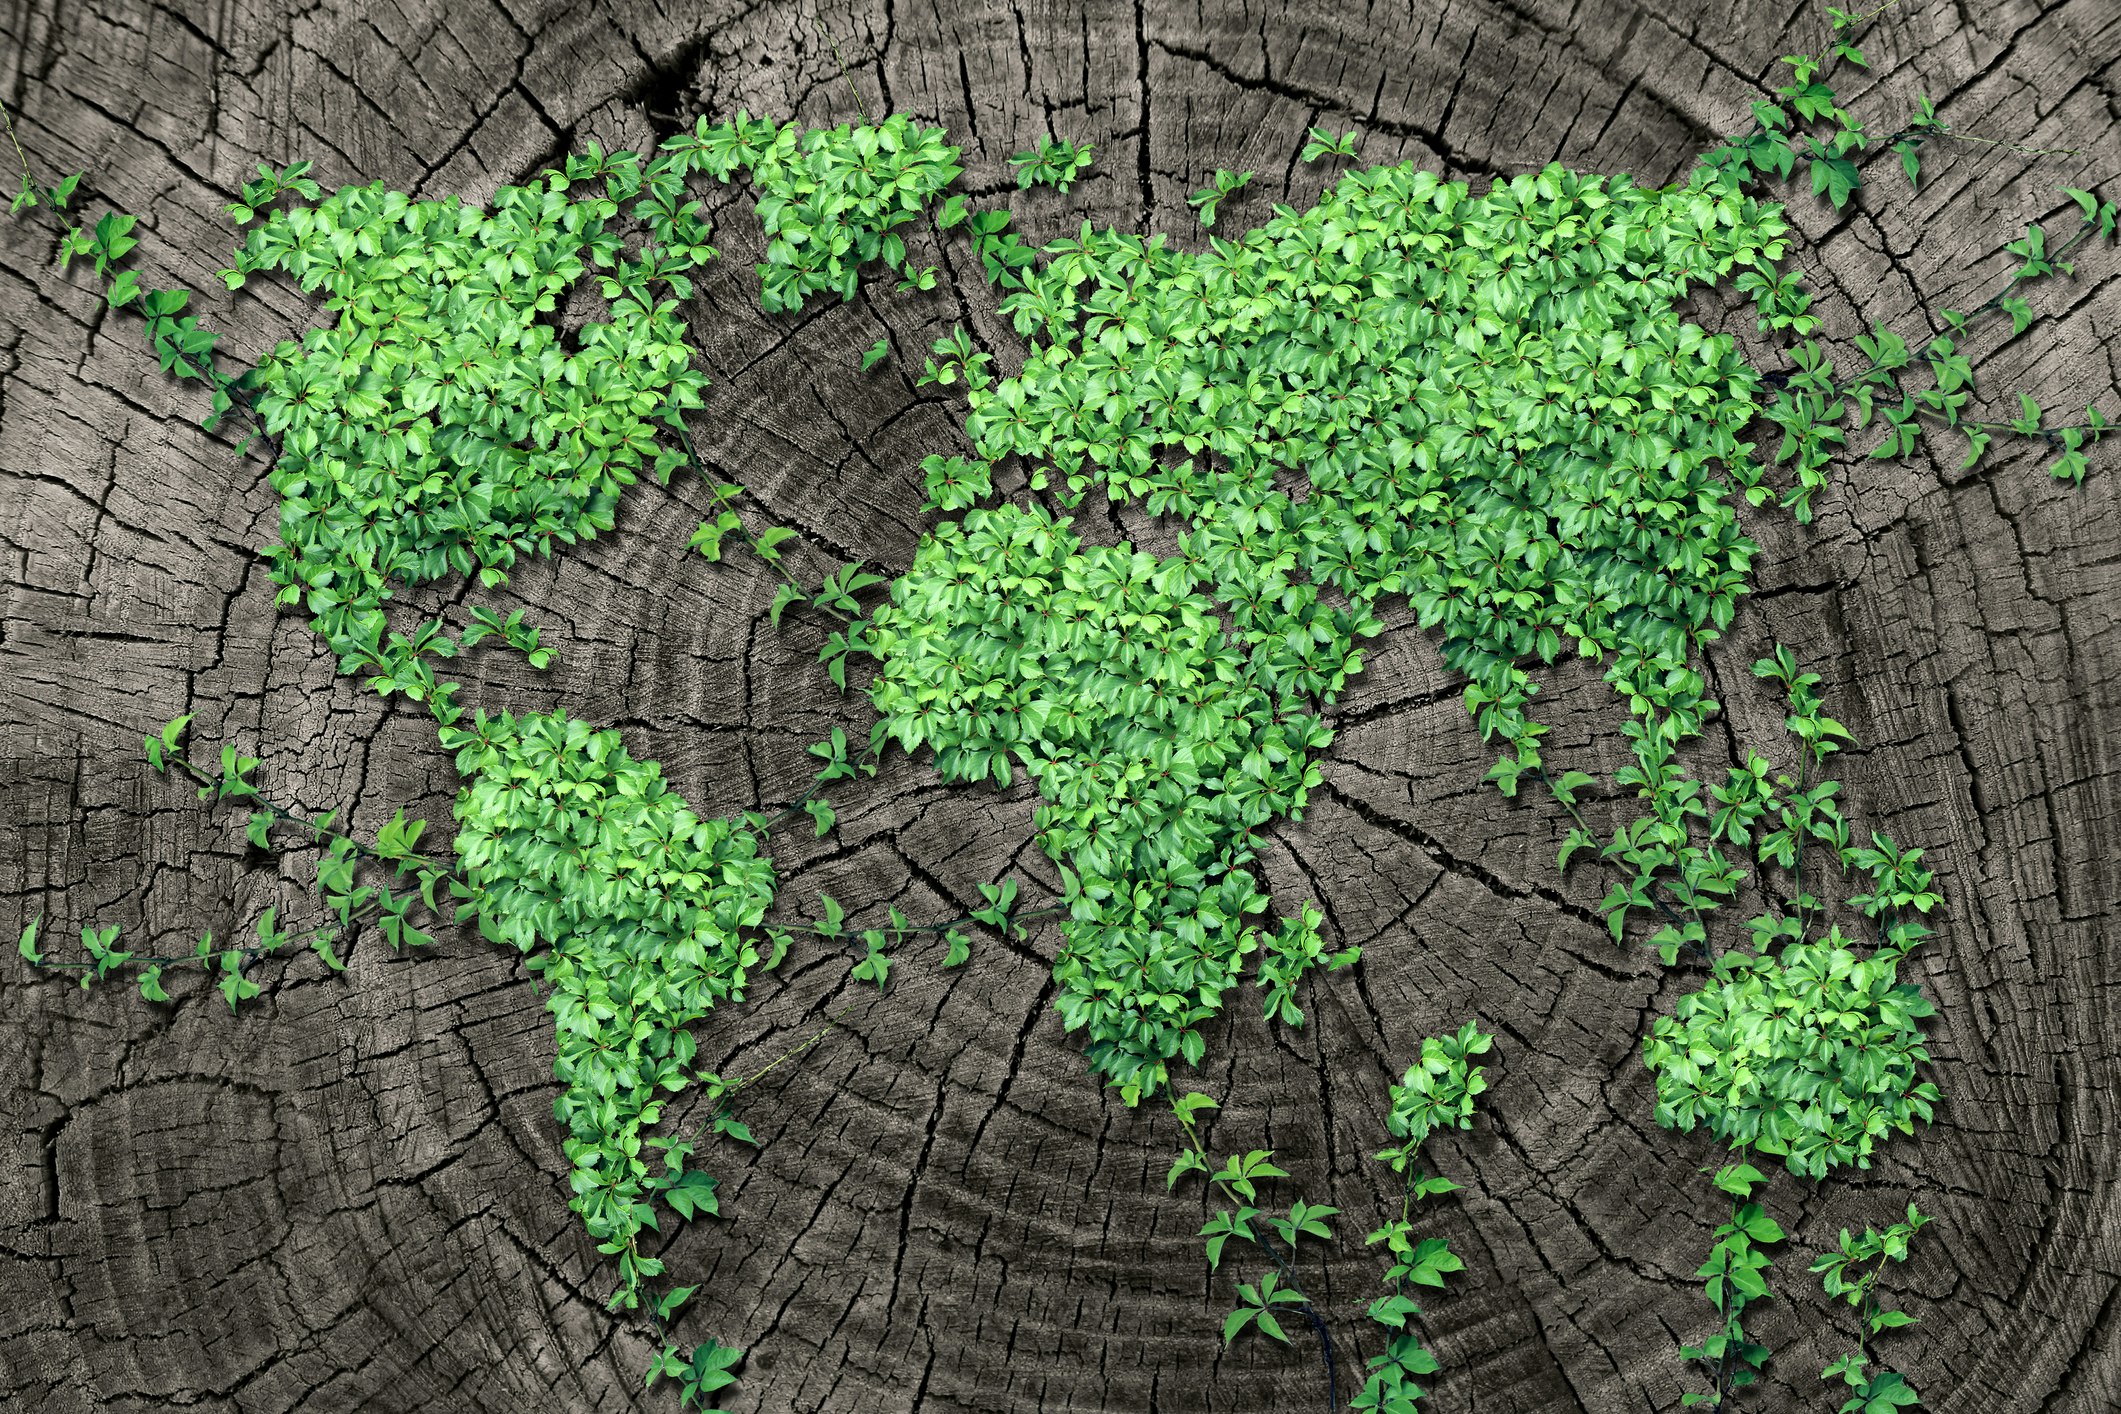 Image of a tree stump with small leaves arranged in the shape of the worlds continents.